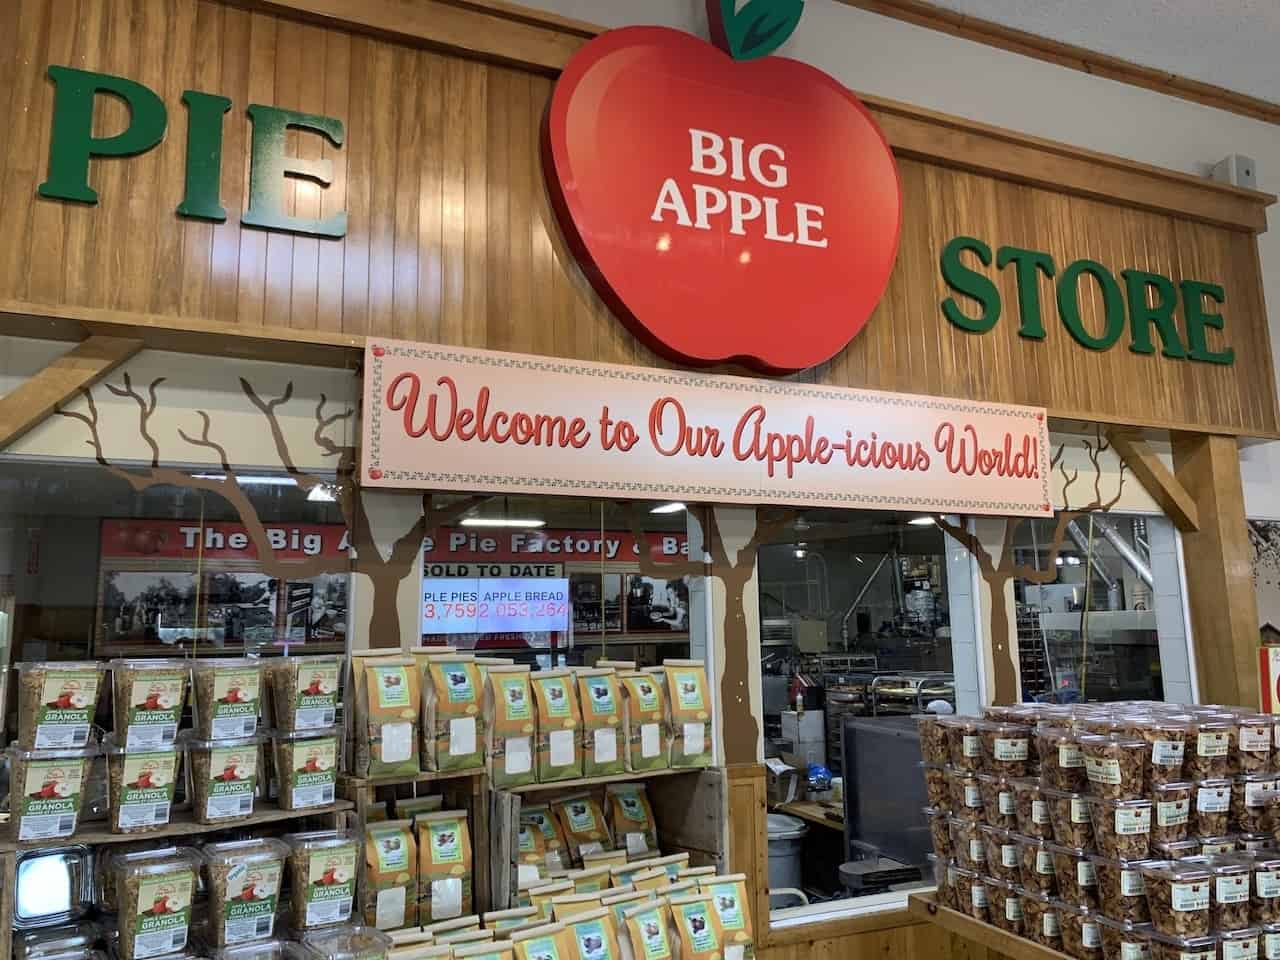 The Big Apple Entrance Colborne Ontario - In the entrance way, a sign welcomes guests to the Big Apple "apple-icious world!" The large glass windows under the sign showcase the pie and bread making magic in action. 